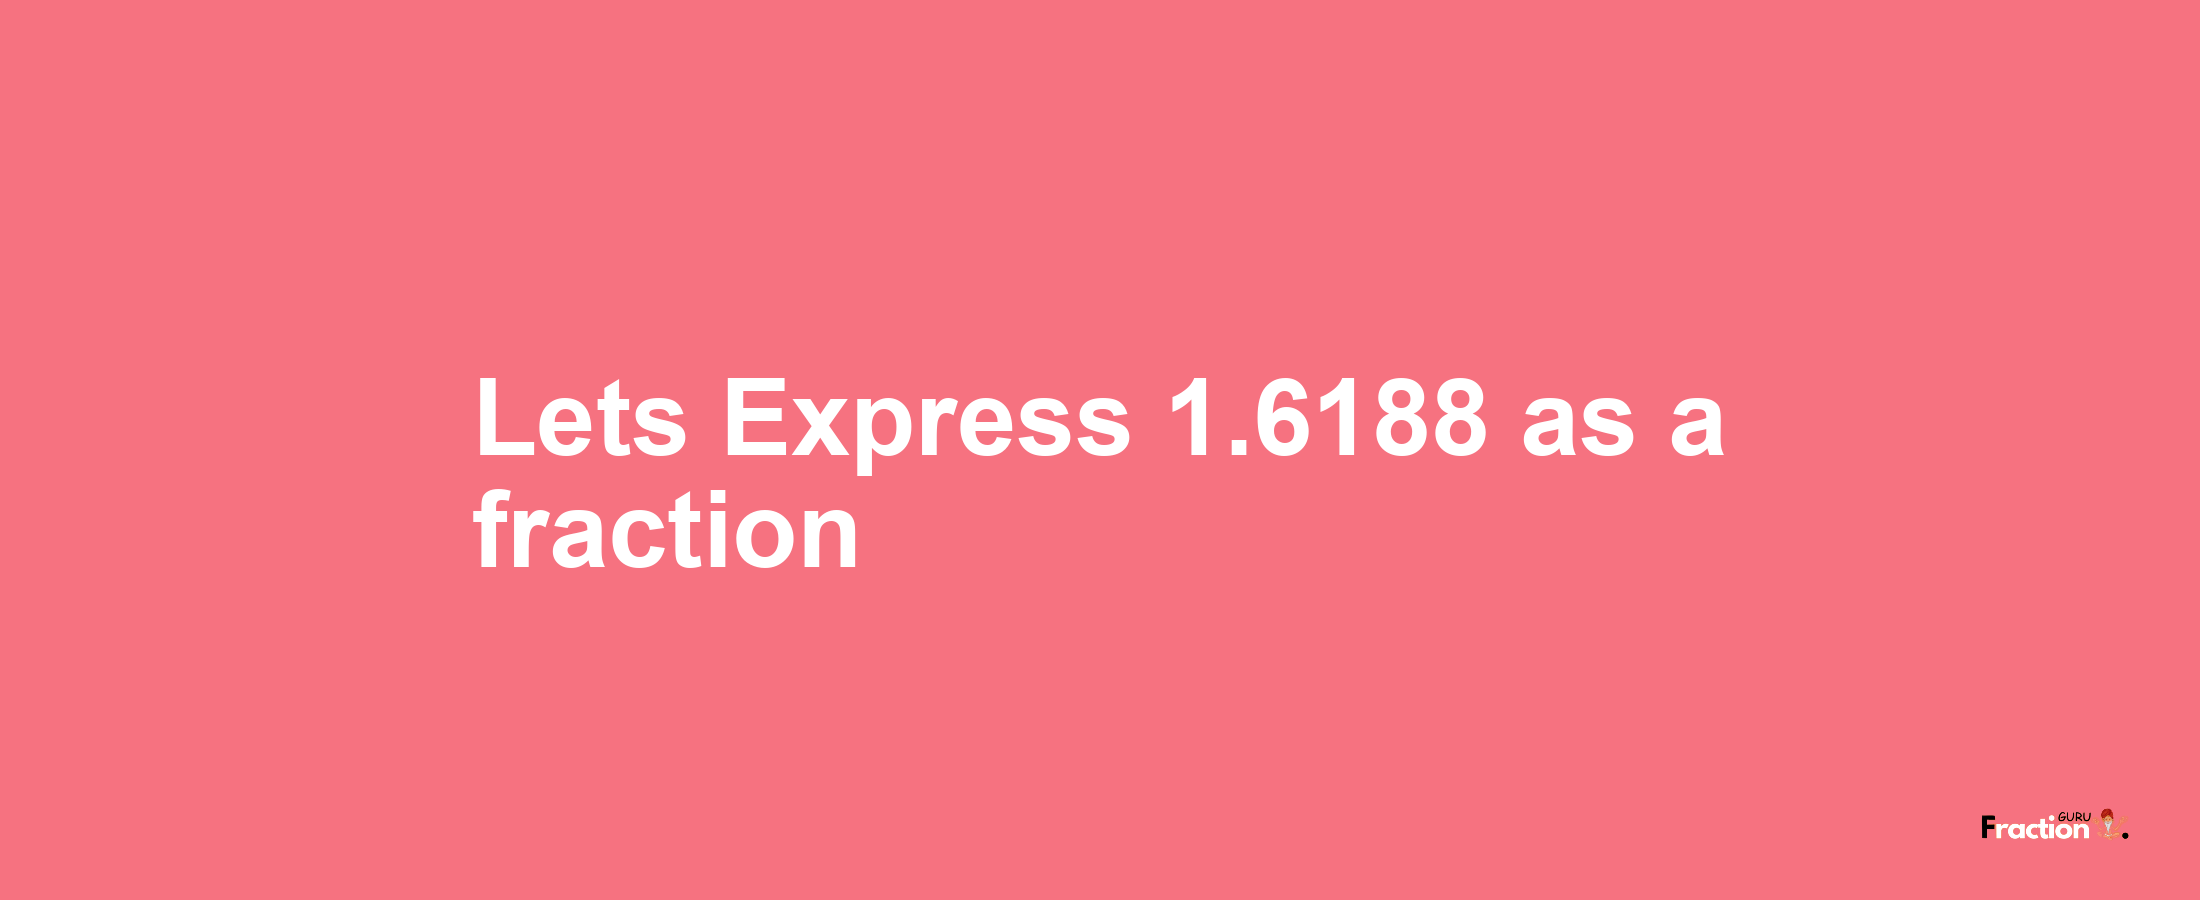 Lets Express 1.6188 as afraction